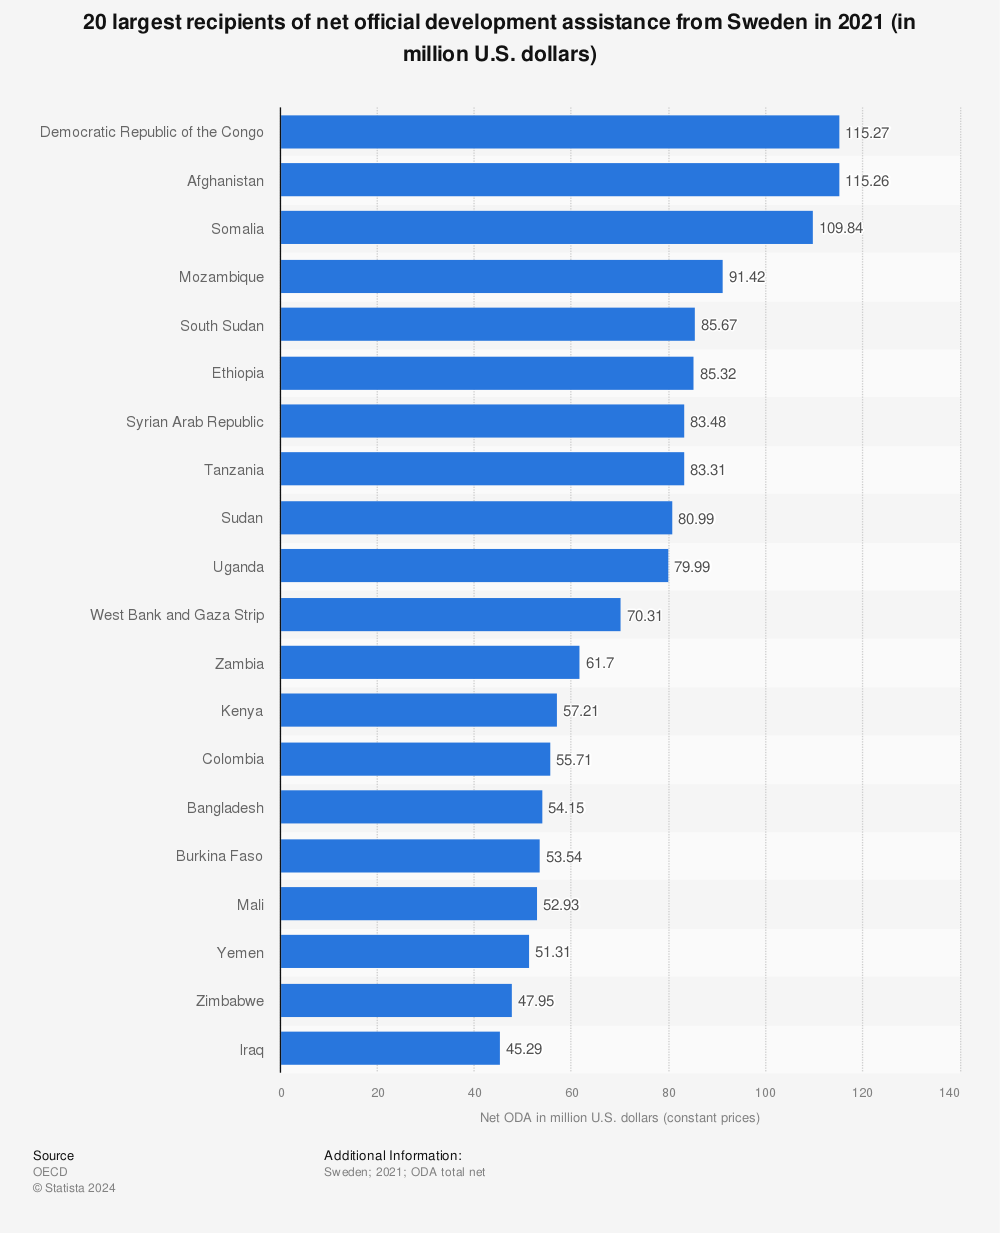 Statistic: 20 largest recipients of net official development assistance from Sweden in 2021 (in million U.S. dollars) | Statista